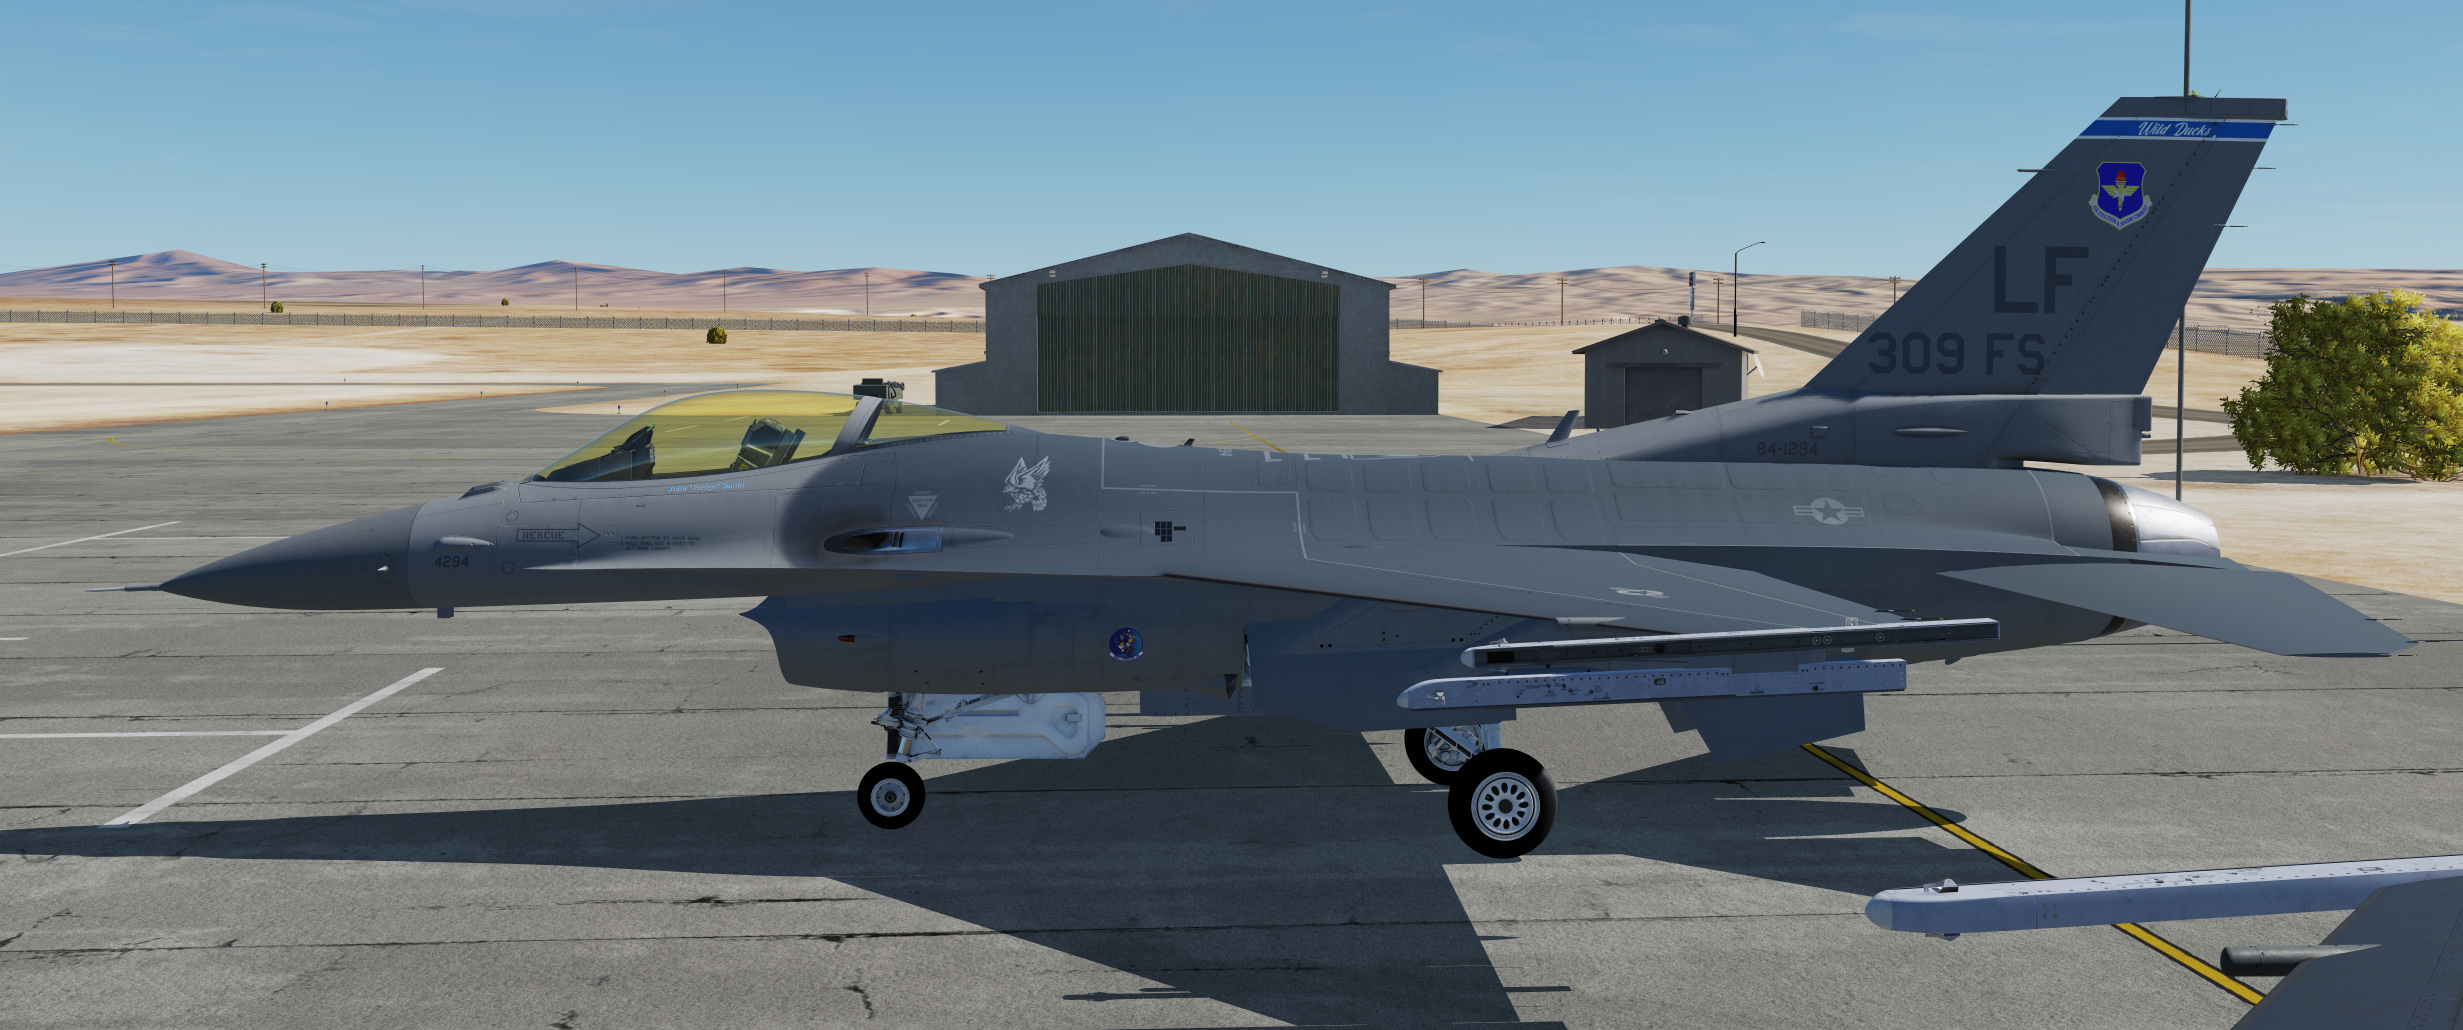 *UPDATED* v2 -- 309th Fighter Squadron "Wild Ducks"